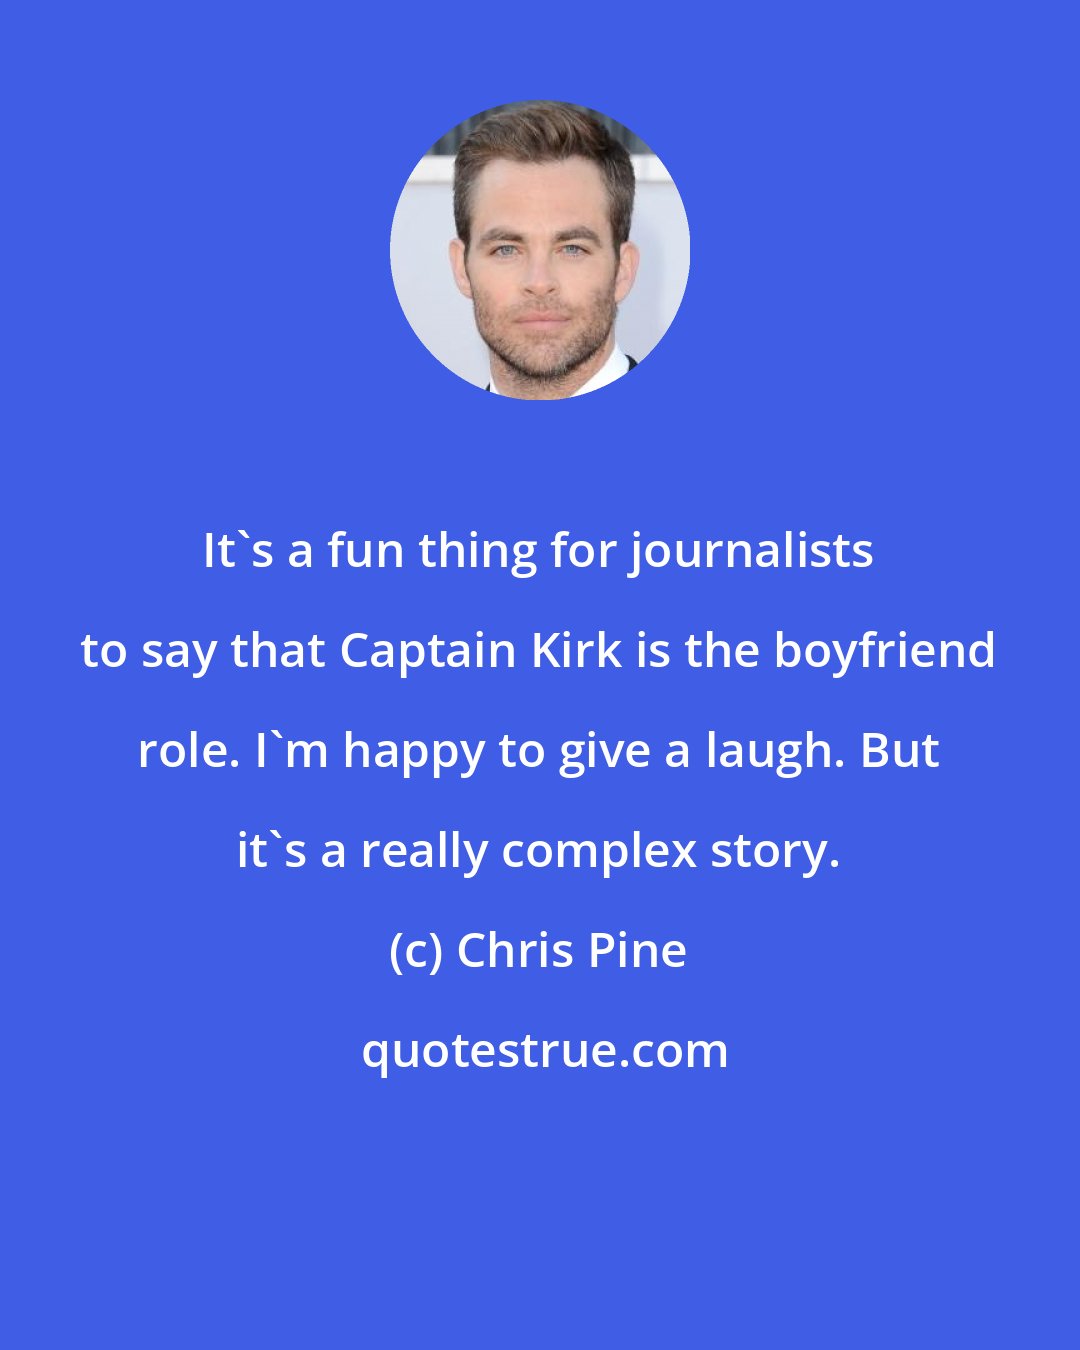 Chris Pine: It's a fun thing for journalists to say that Captain Kirk is the boyfriend role. I'm happy to give a laugh. But it's a really complex story.